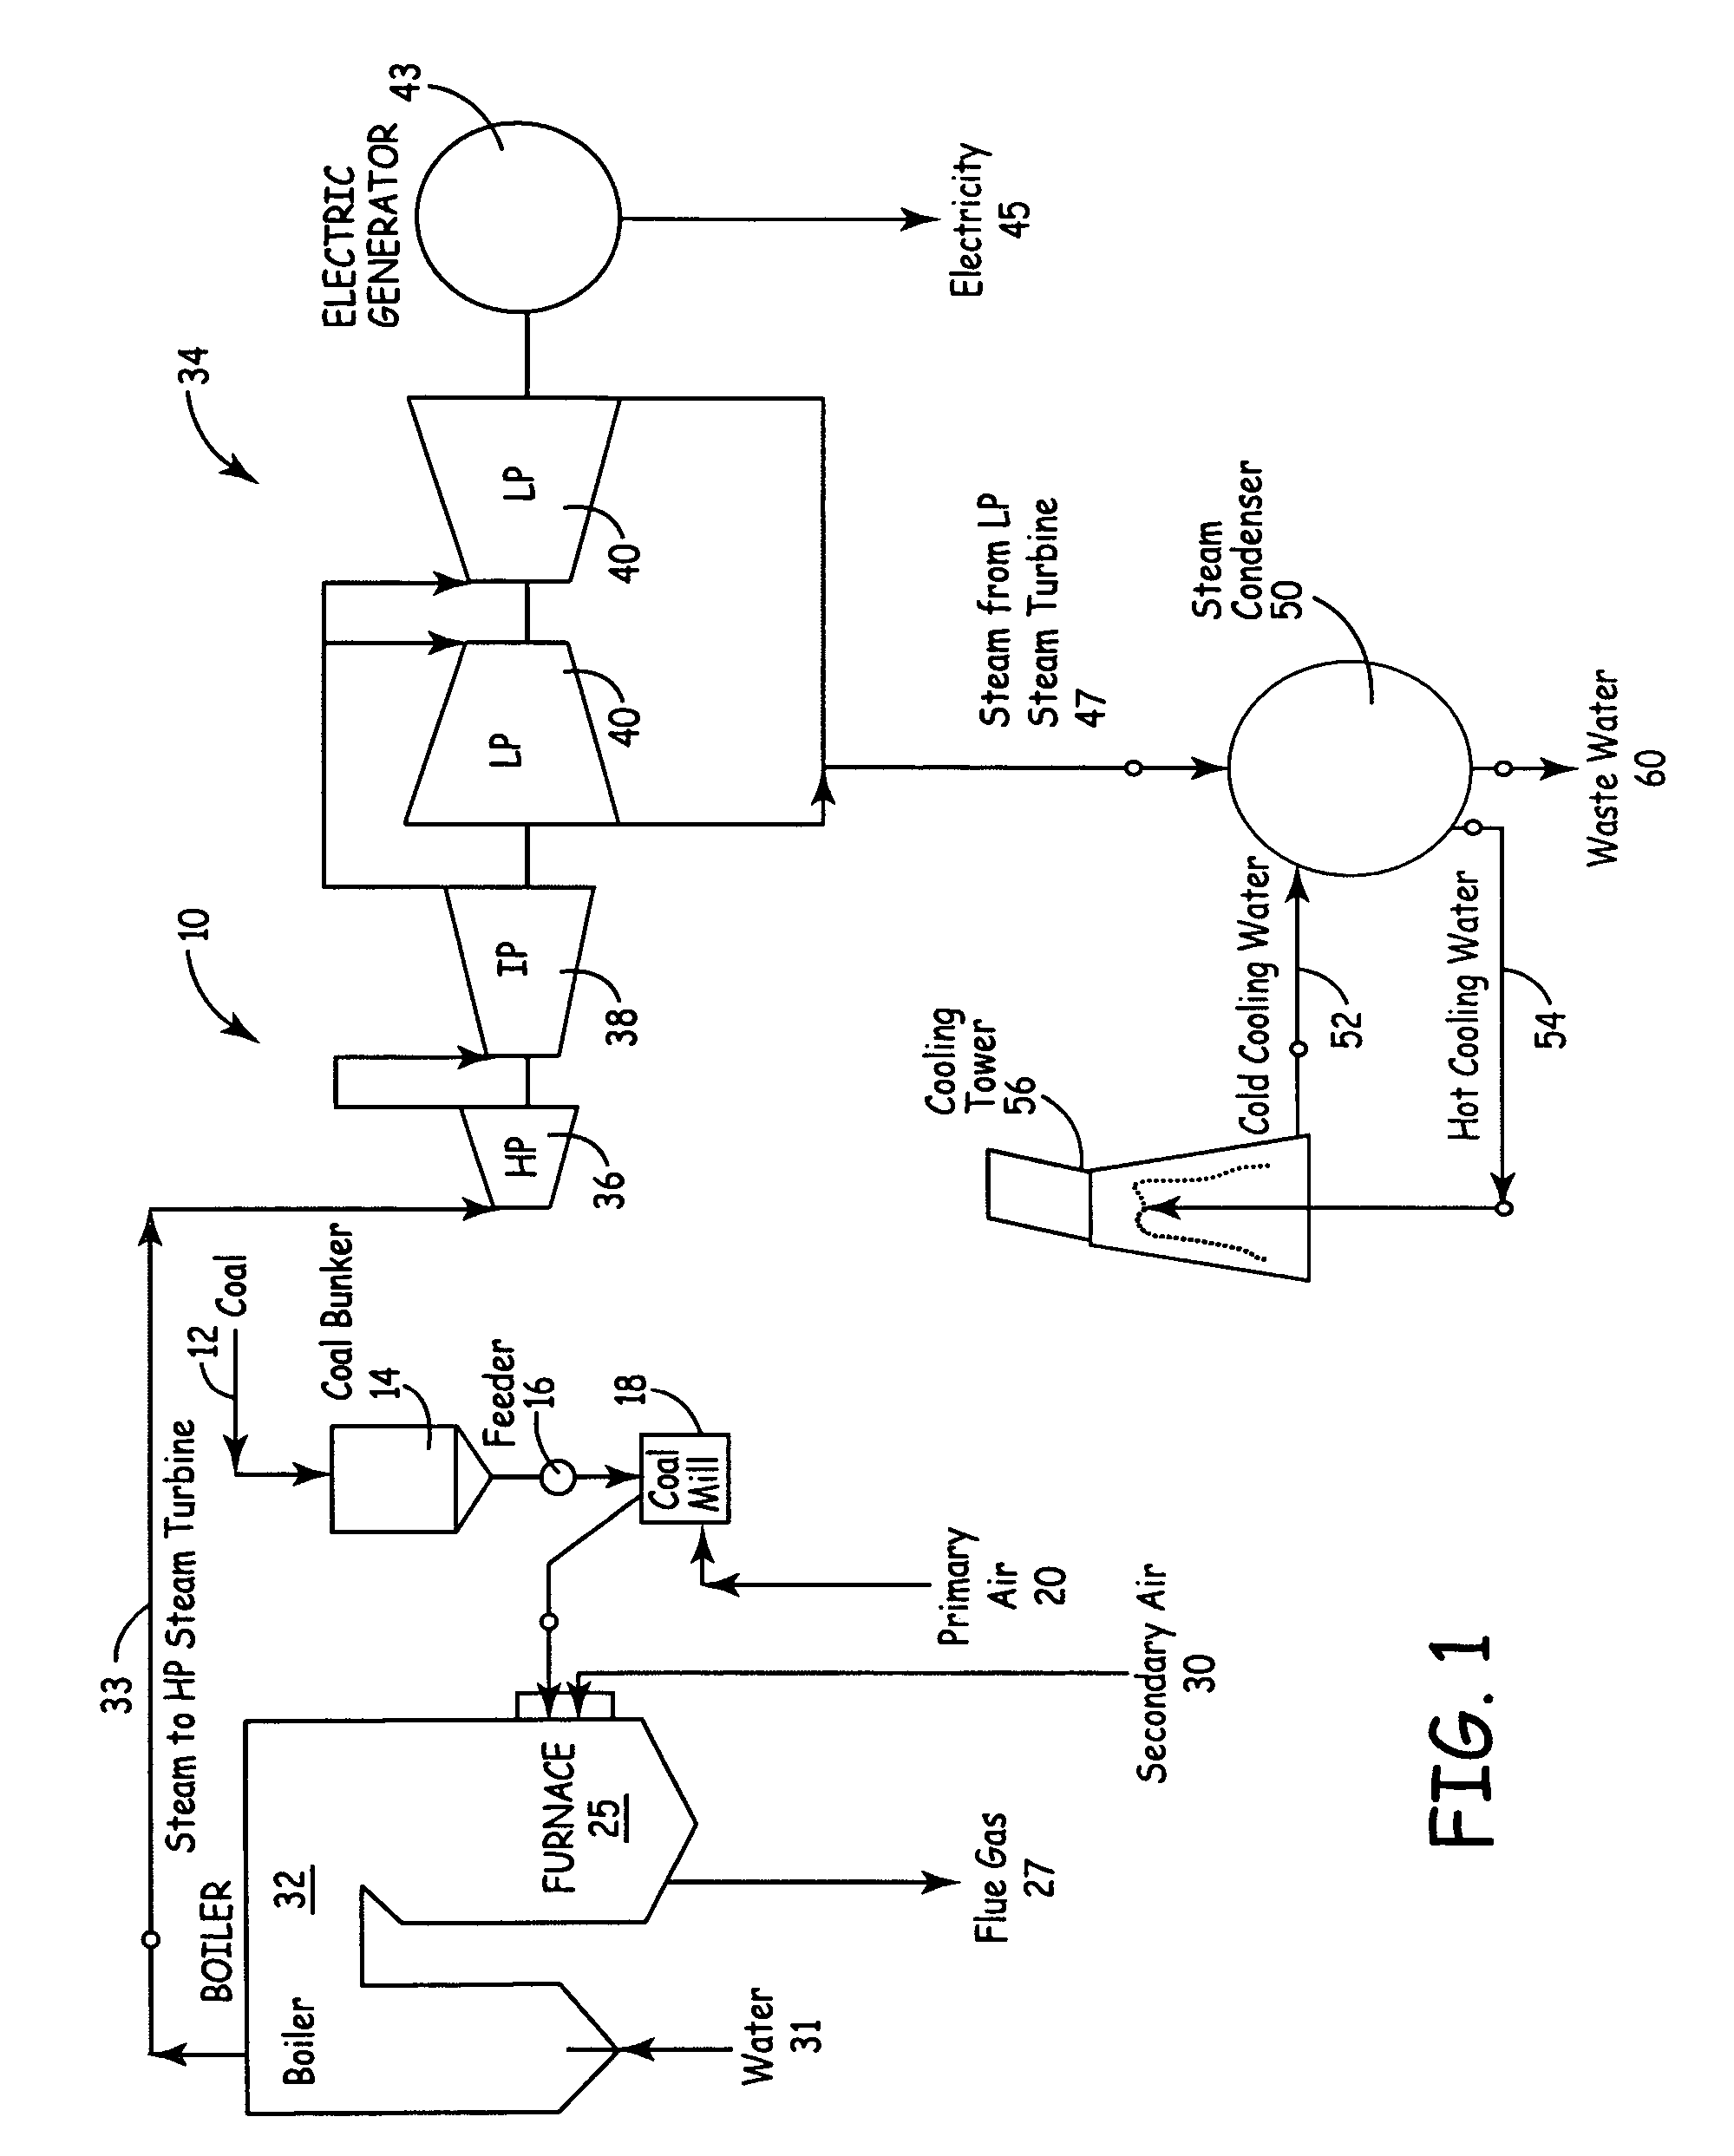 Apparatus and method of separating and concentrating organic and/or non-organic material